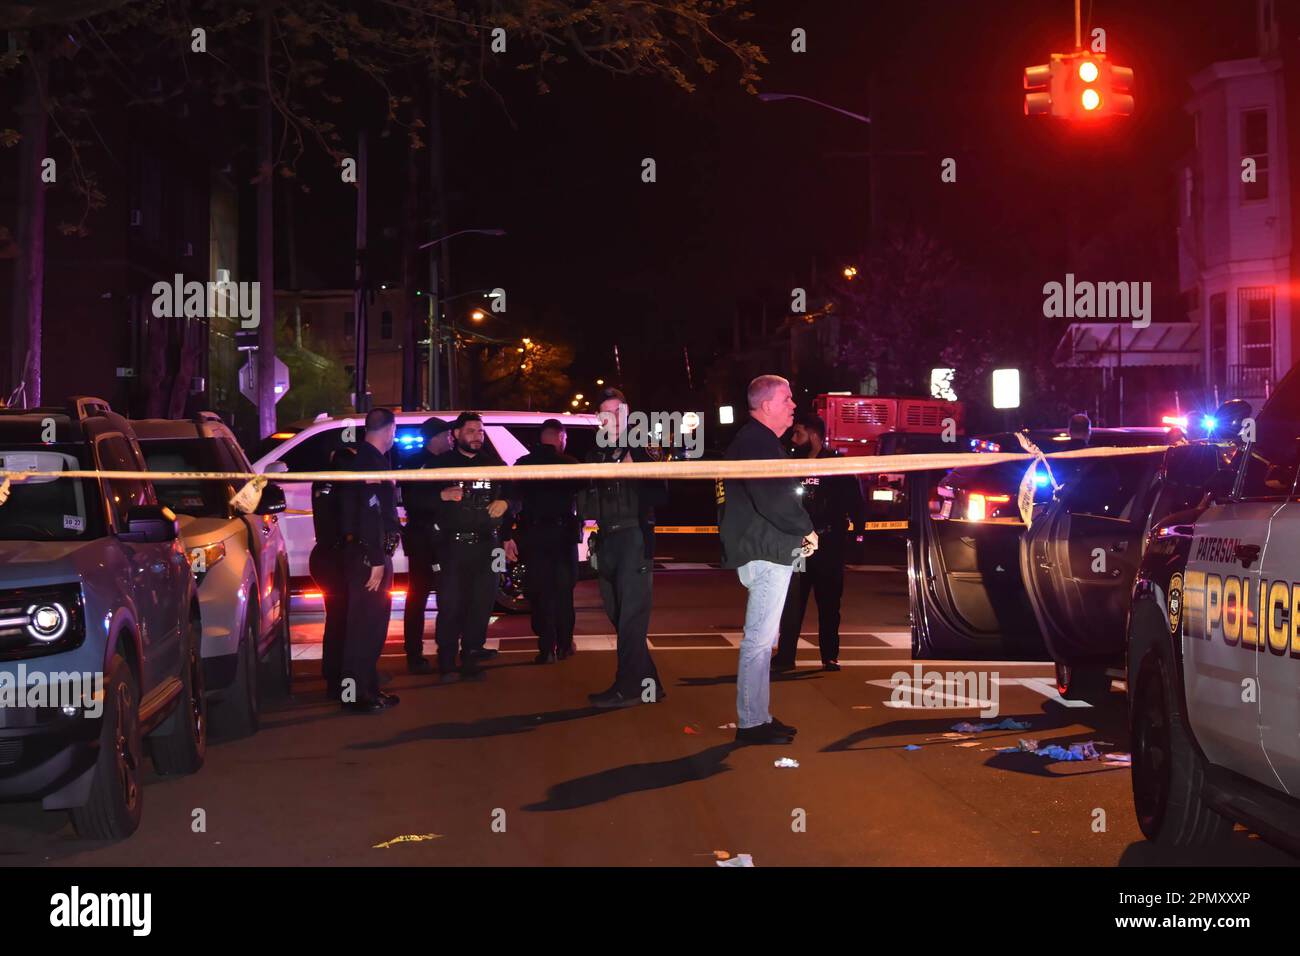 Paterson, USA. 15th Apr, 2023. Police officers gather in the area of East 22nd Street. Four people reported shot in a shooting in Paterson, New Jersey, United States in the early morning hours of Saturday, April 15, 2023. Reportedly, four people were shot early Saturday morning after 12:00 AM in Paterson, some of the victims were transported by EMS and some victims were transported by private vehicles. No further information was immediately available from the Paterson police department. There are several crime scenes. One crime scene in the area of East 22nd Street had a vehicle stop Stock Photo